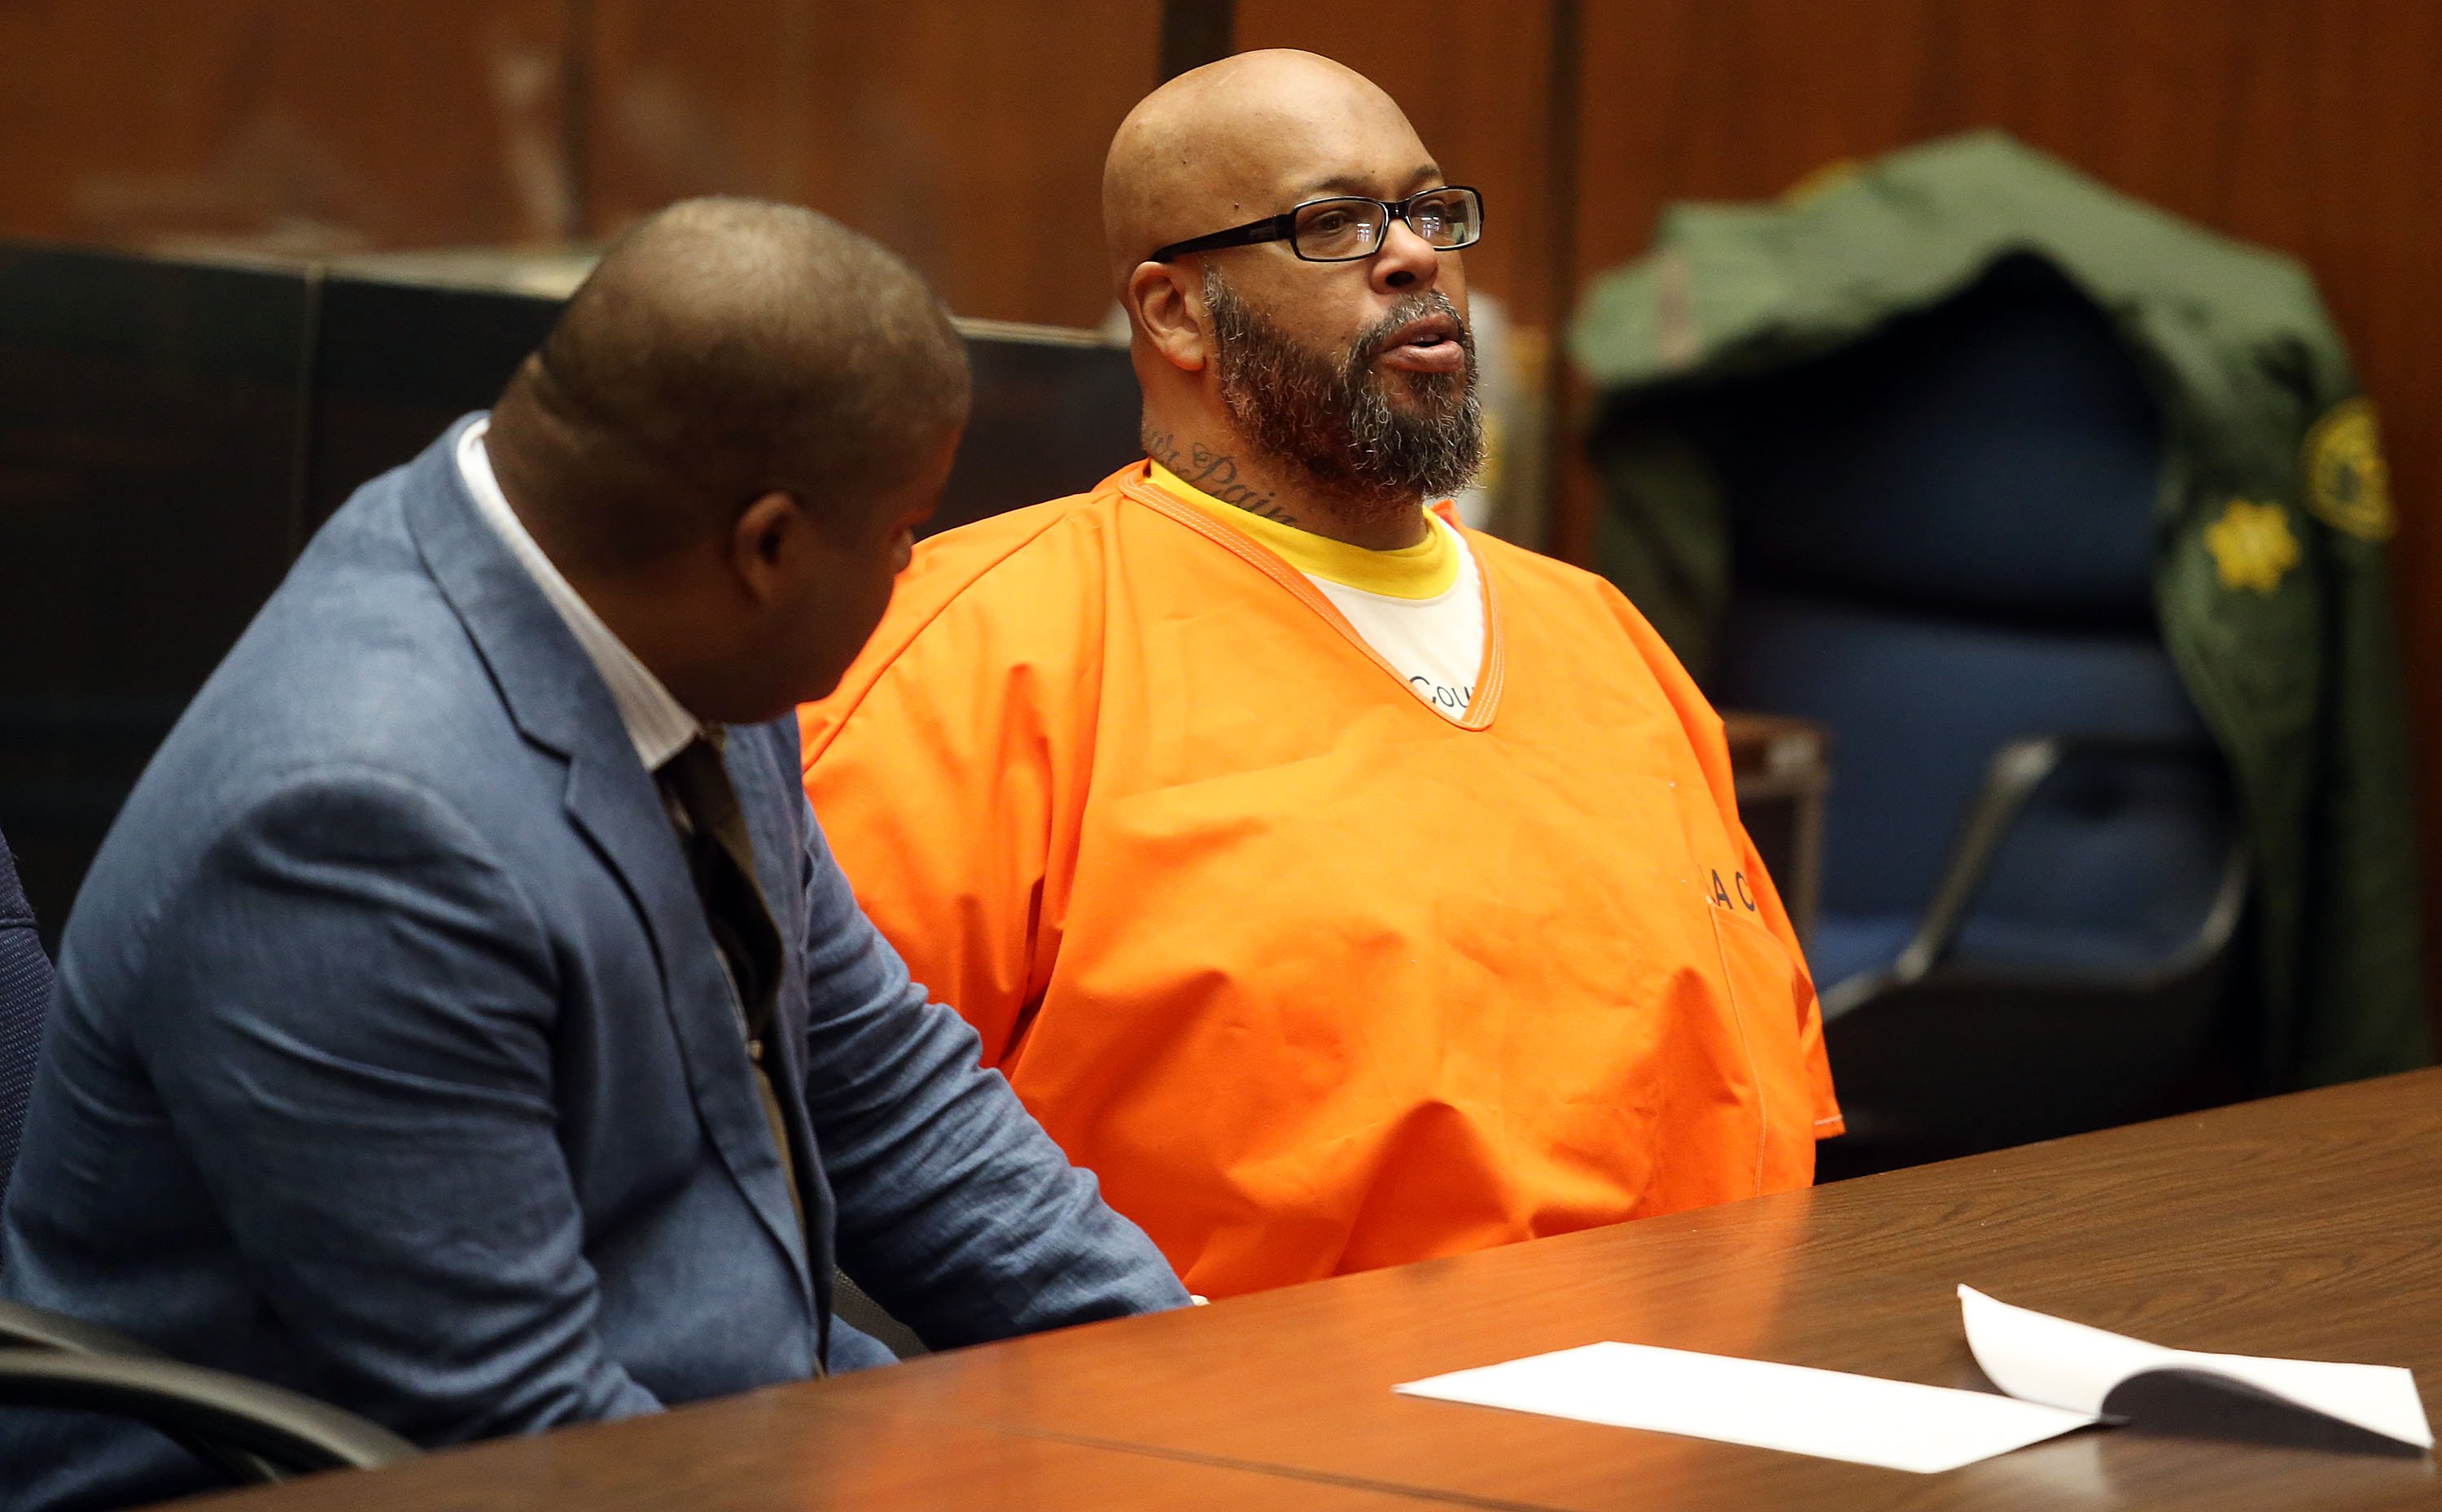  "Suge" Knight and his attorney Thaddeus Culpepper appear in court at the Clara Shortridge Foltz Criminal Justice Center on February 26, 2016 in Los Angeles, California | Photo: Getty Images